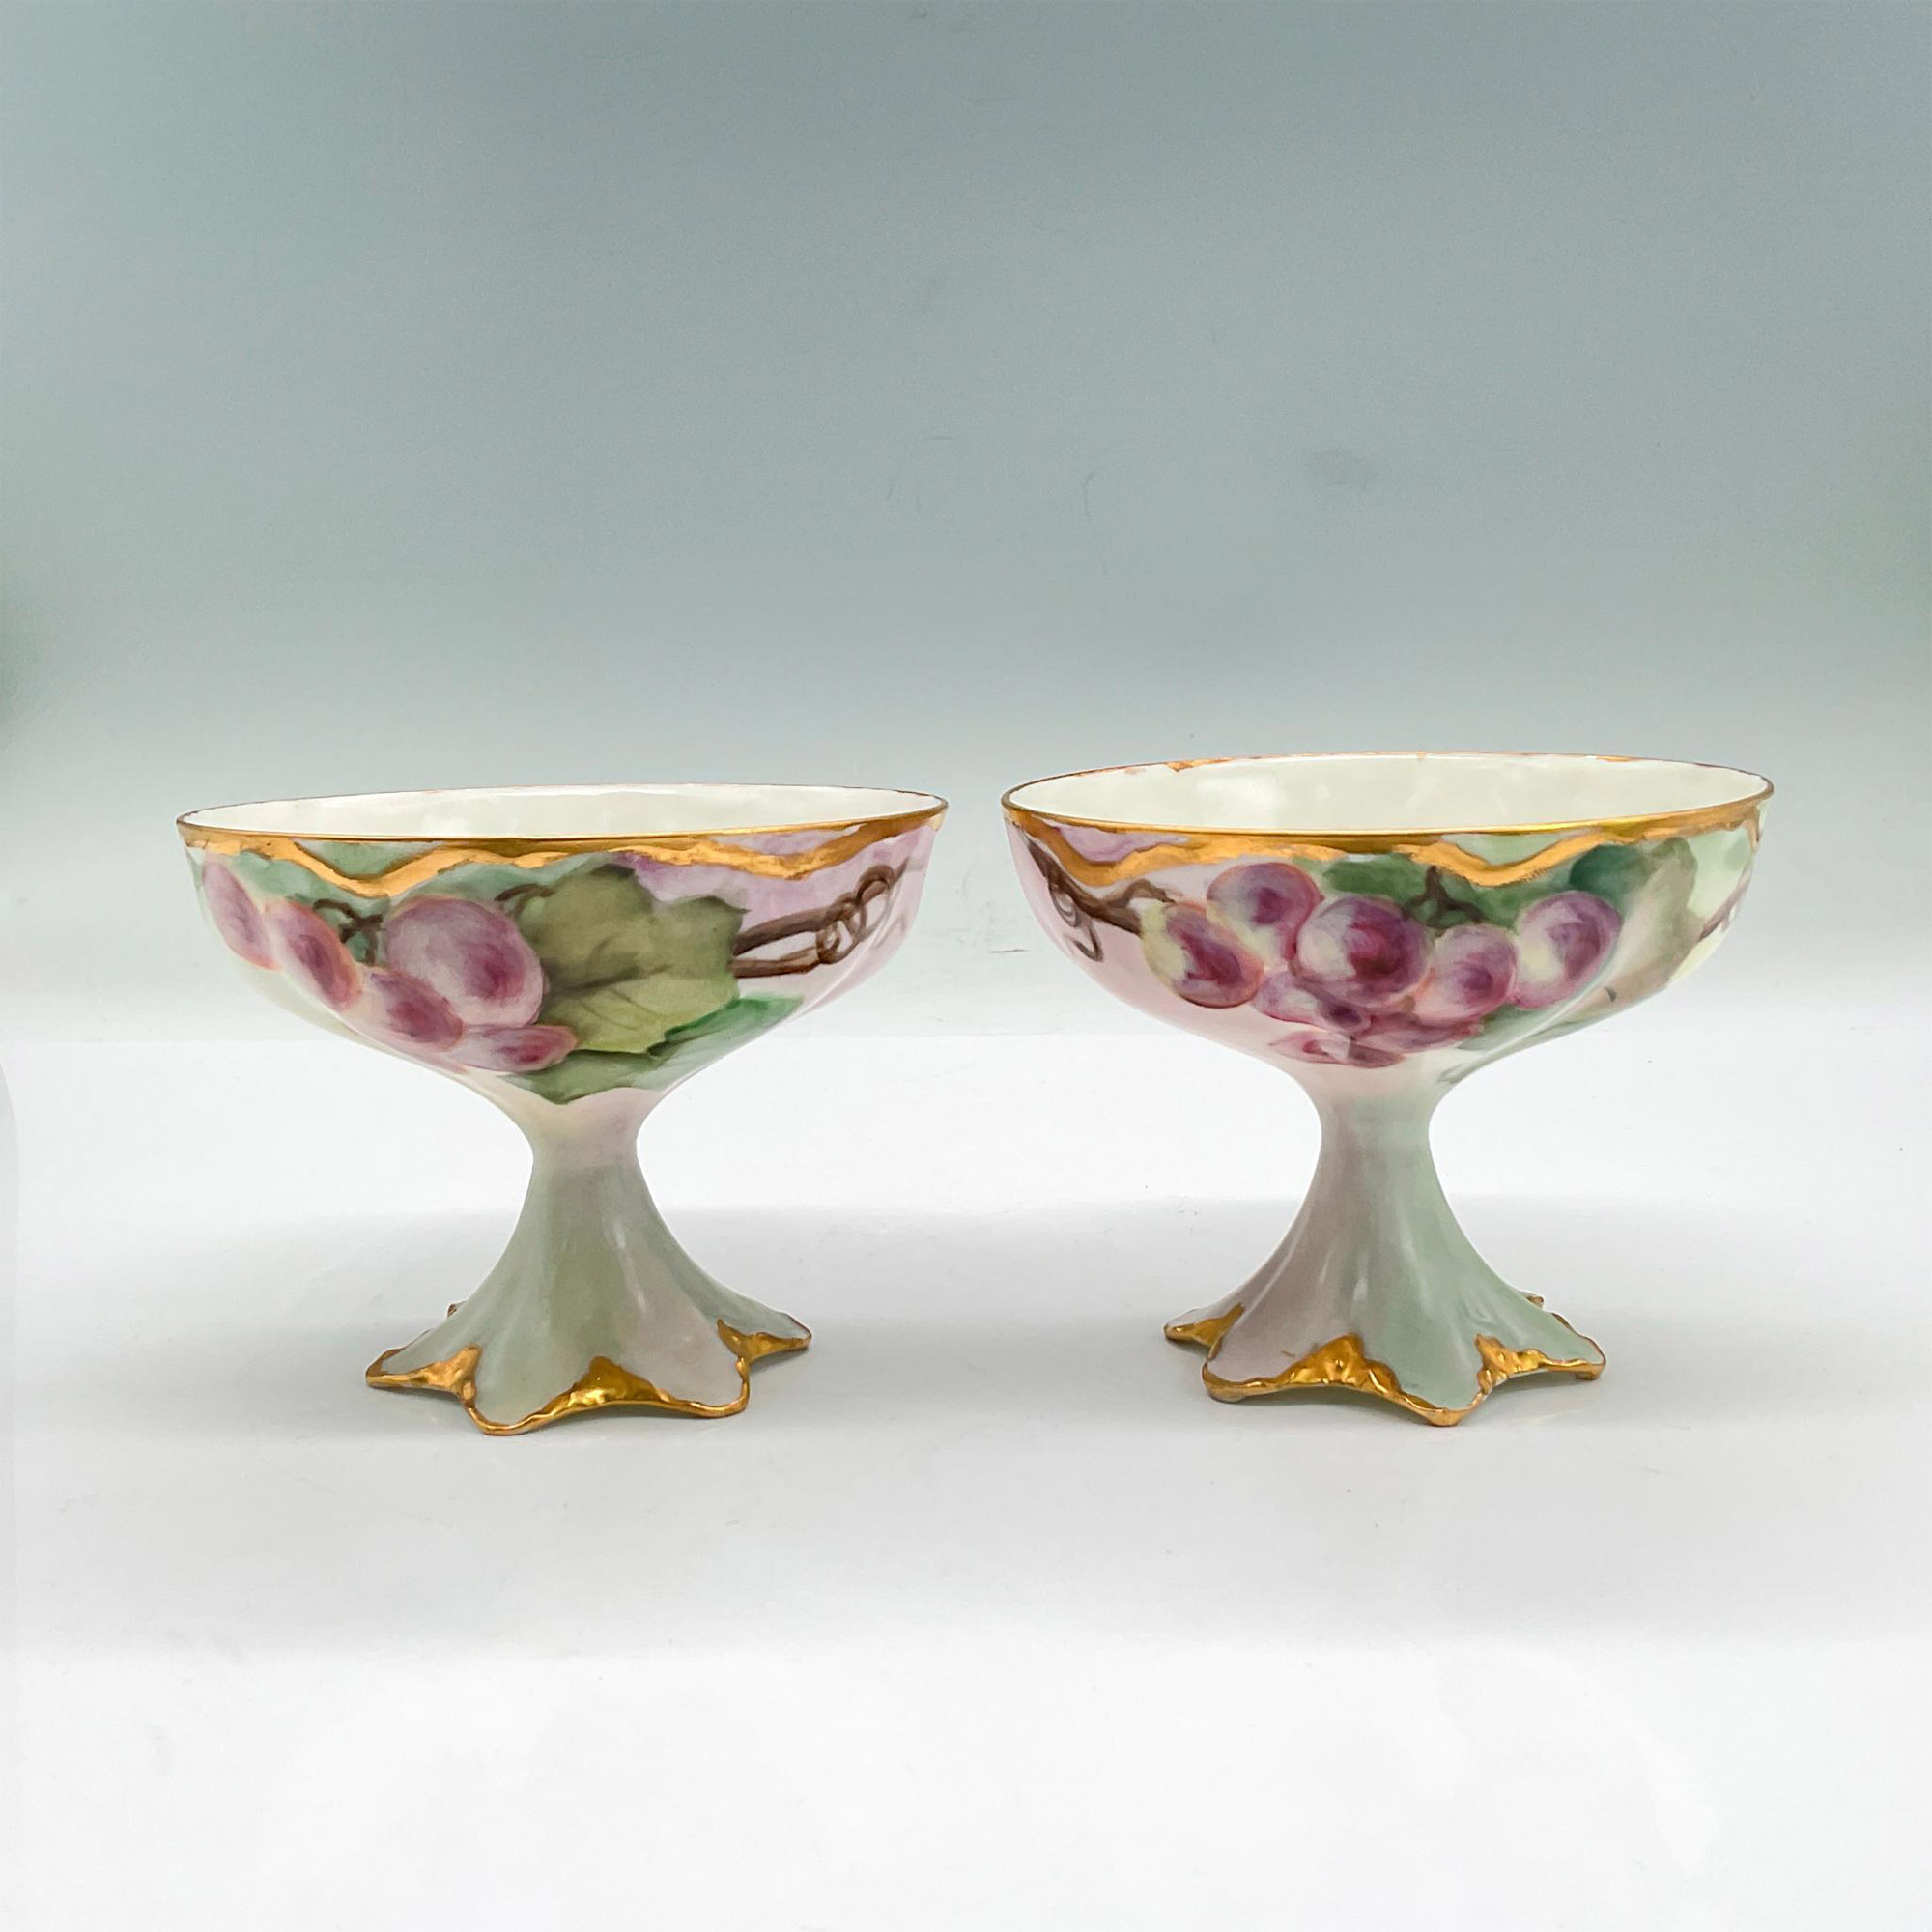 3pc W.G. & Co. Limoges Porcelain Pitcher + 2 Cups, Grapes - Image 6 of 7